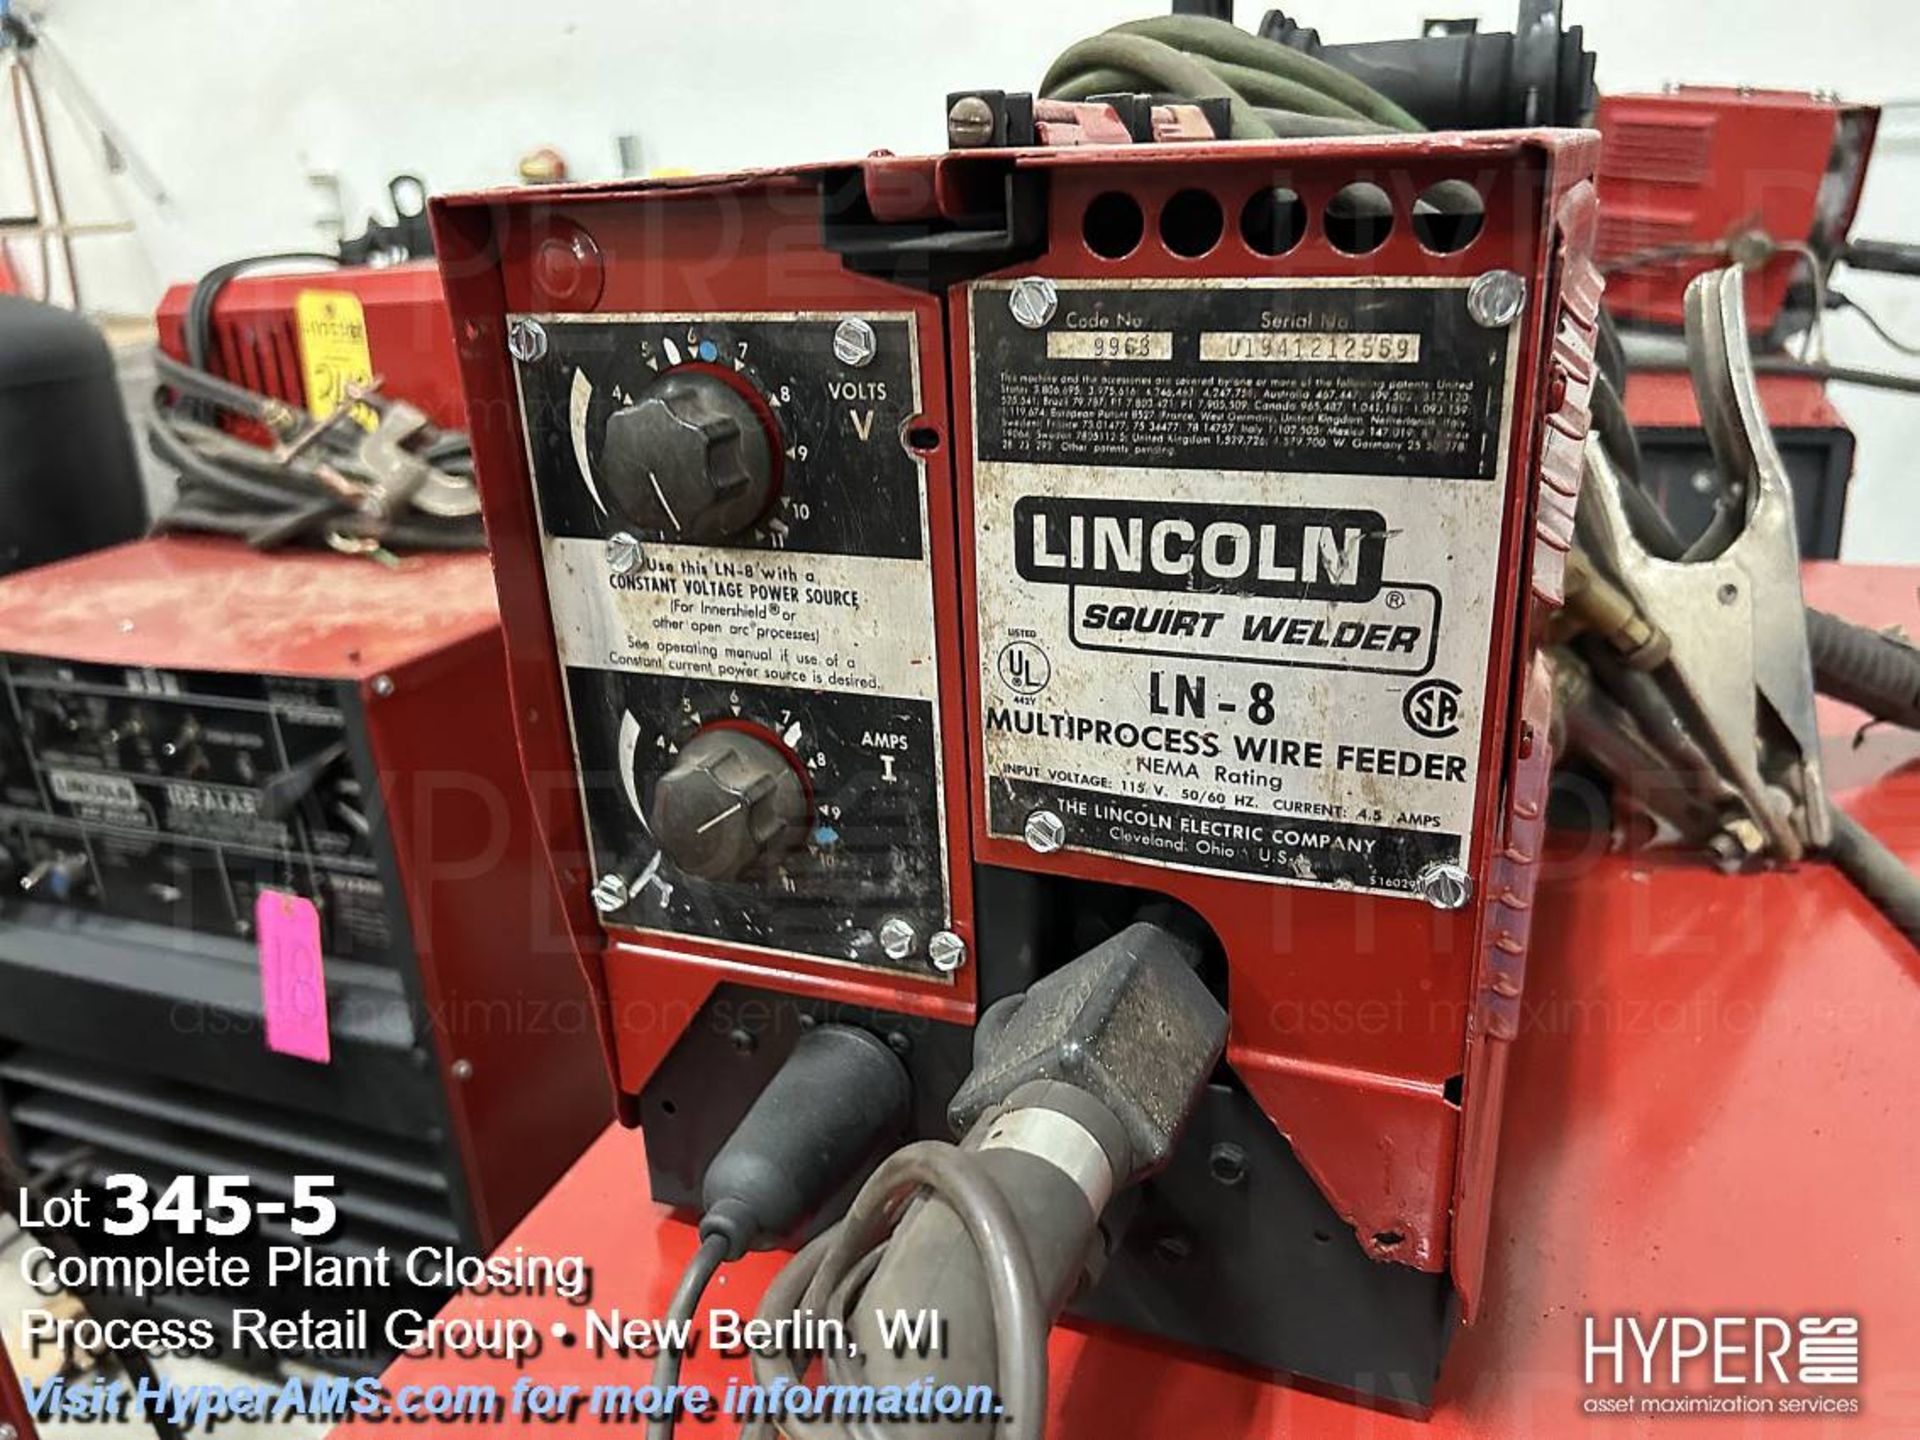 Lincoln DC 600 Lincoln DC 600 MIG & LN8 Welder - Image 5 of 7